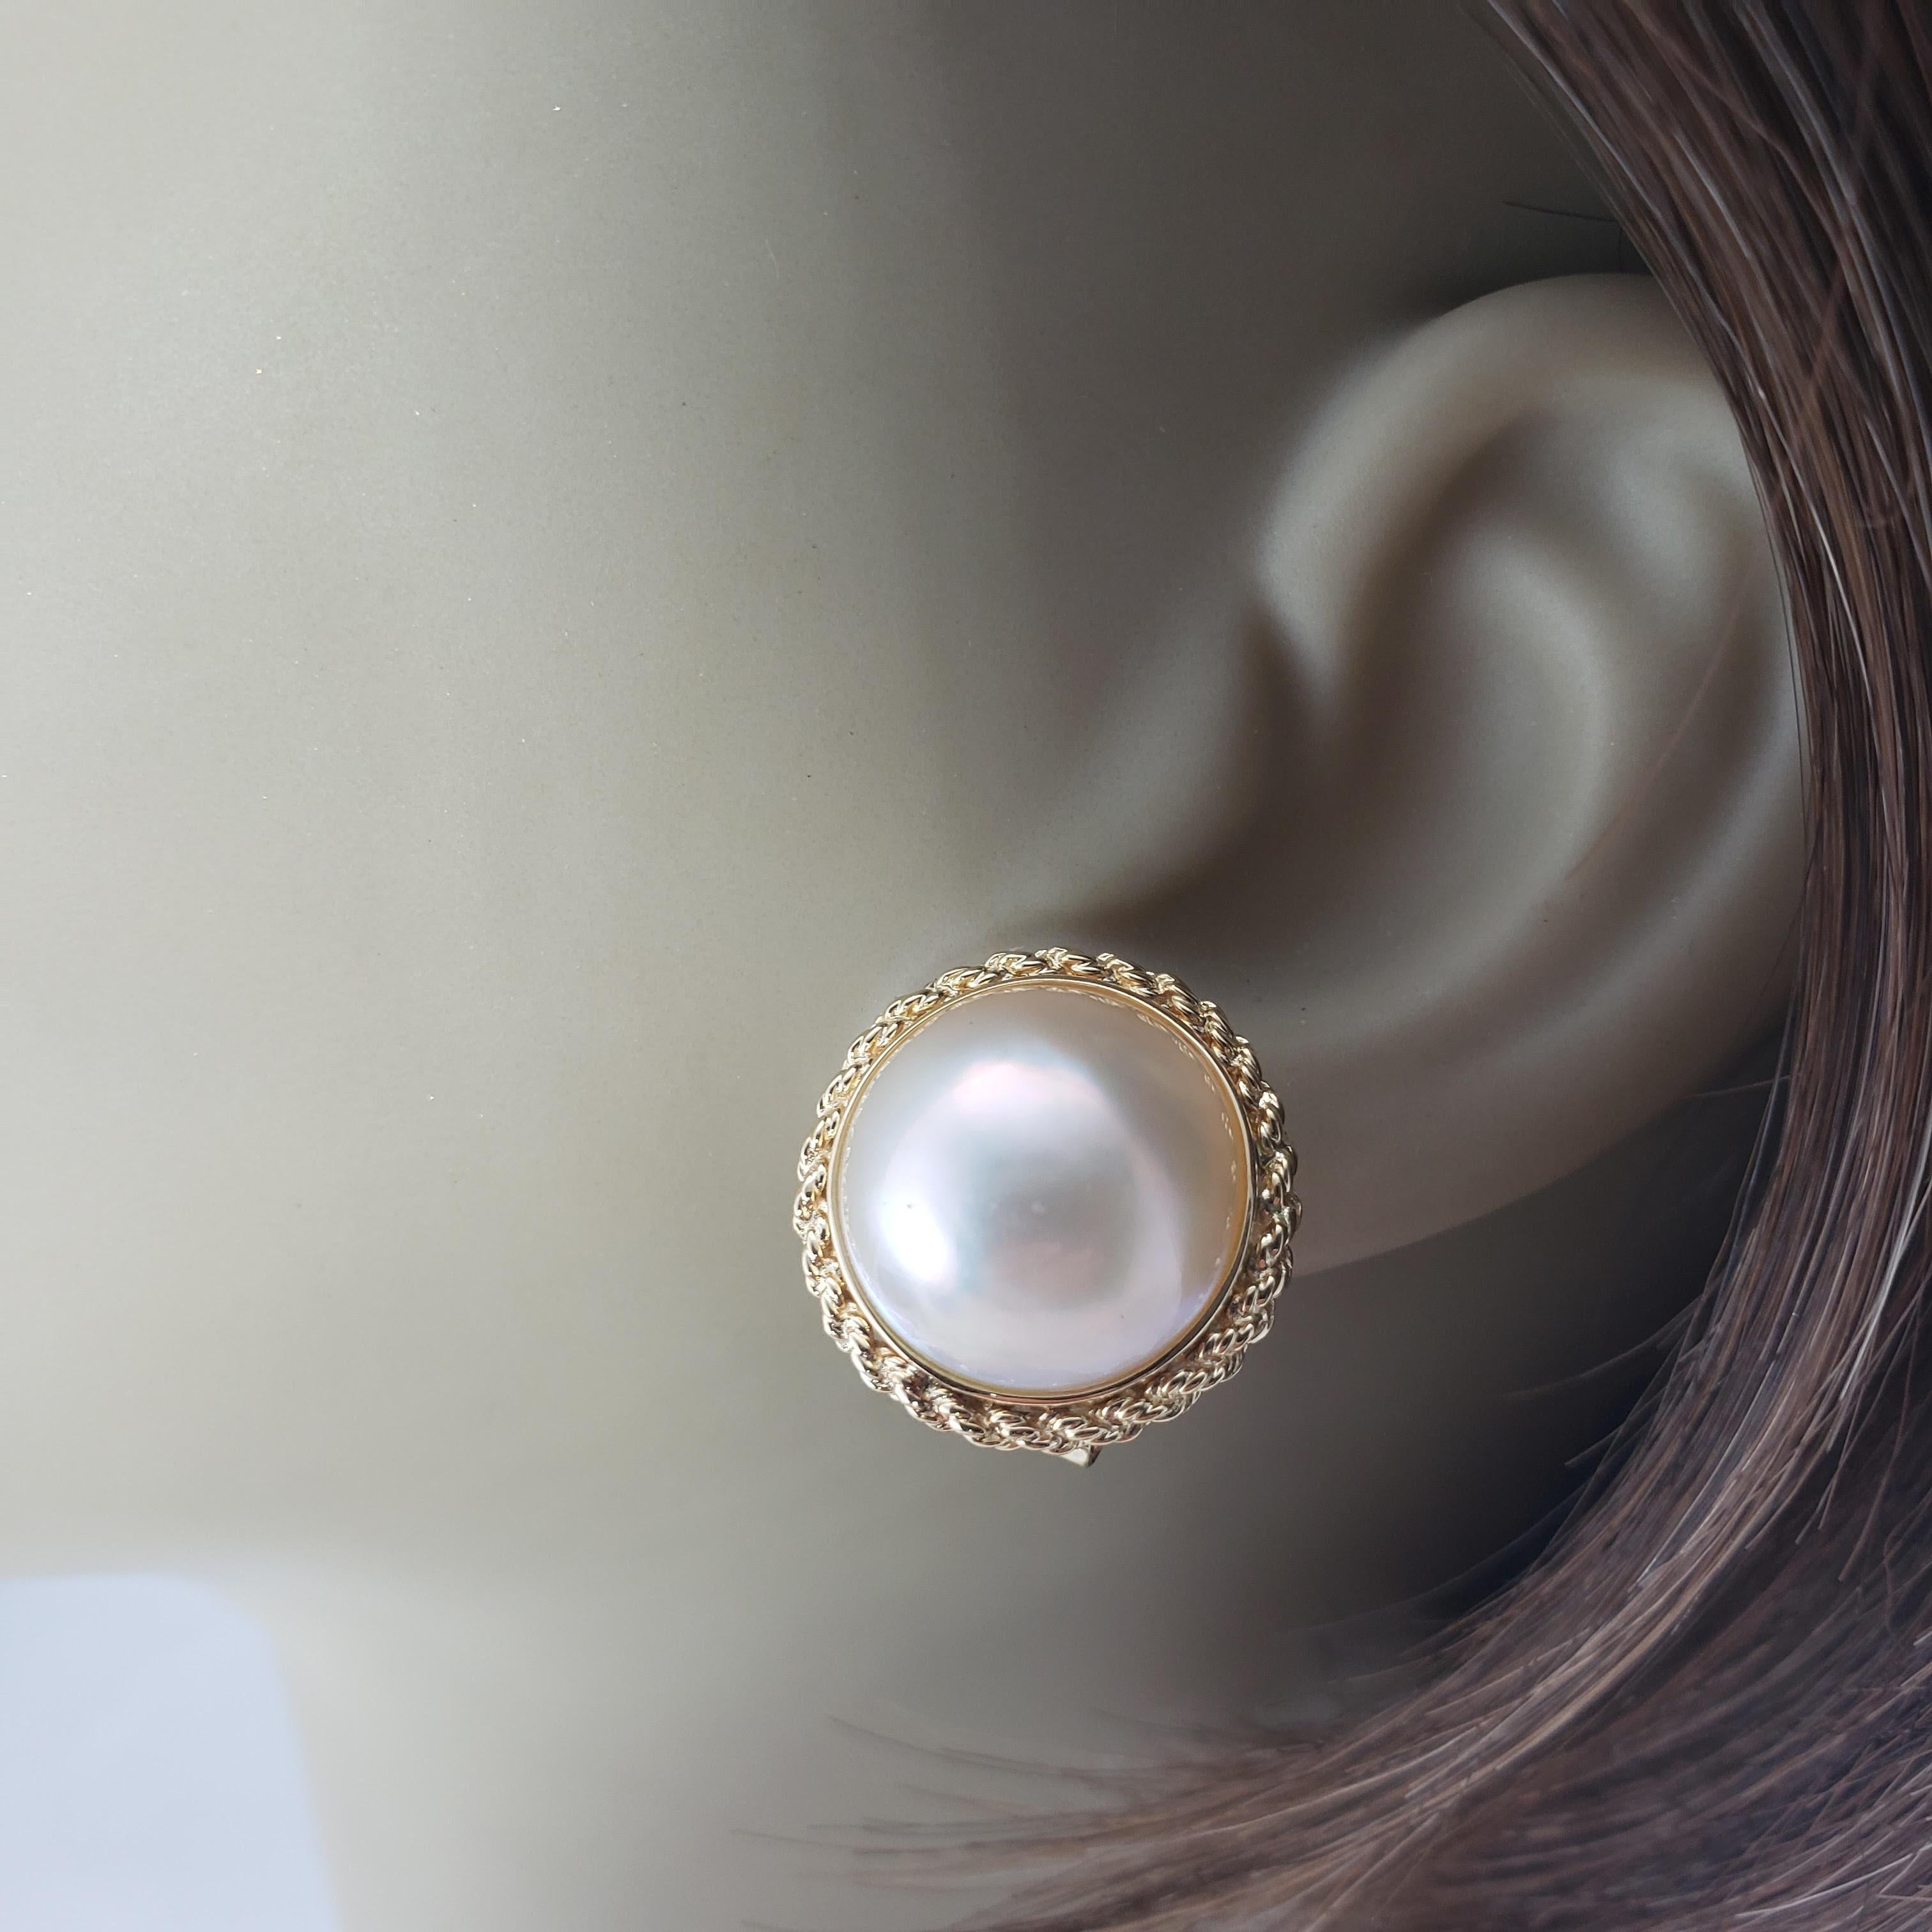 Vintage 14 Karat Yellow Gold and Pearl Earrings-

These lovely earrings each feature one round pearl (14 mm) set in beautifully detailed 14K yellow gold. Omega back closures.

Size: 18 mm

Weight: 5.2 dwt. / 8.1 gr.

Stamped: 20 14K 585

Very good